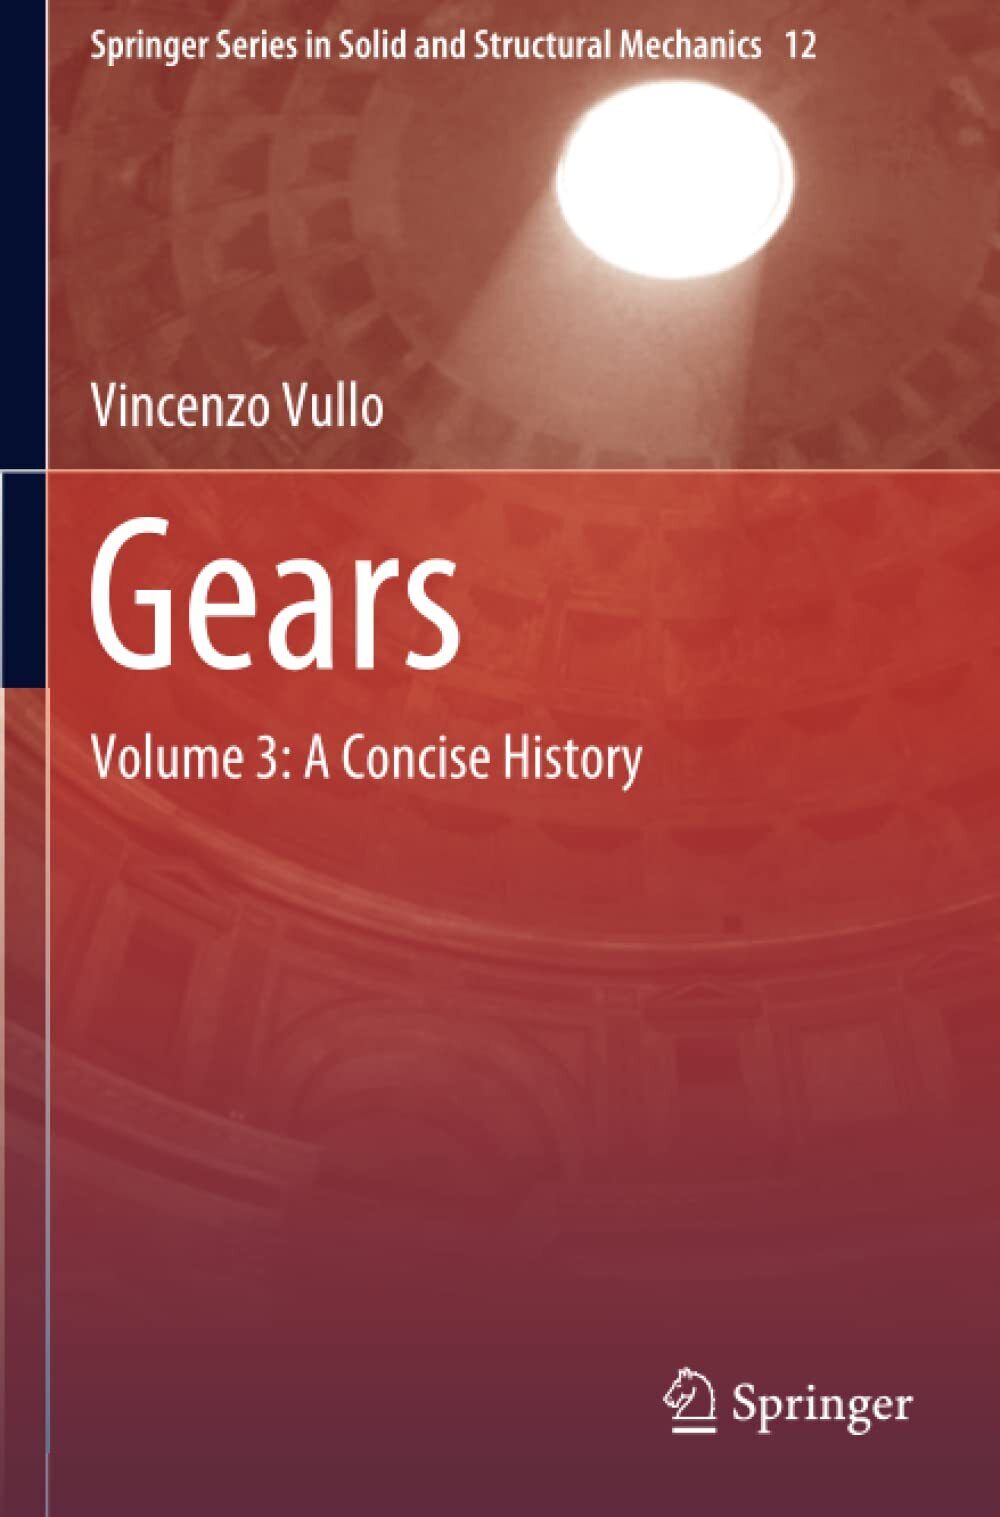 Gears: Volume 3: A Concise History - Vincenzo Vullo - Springer, 2021